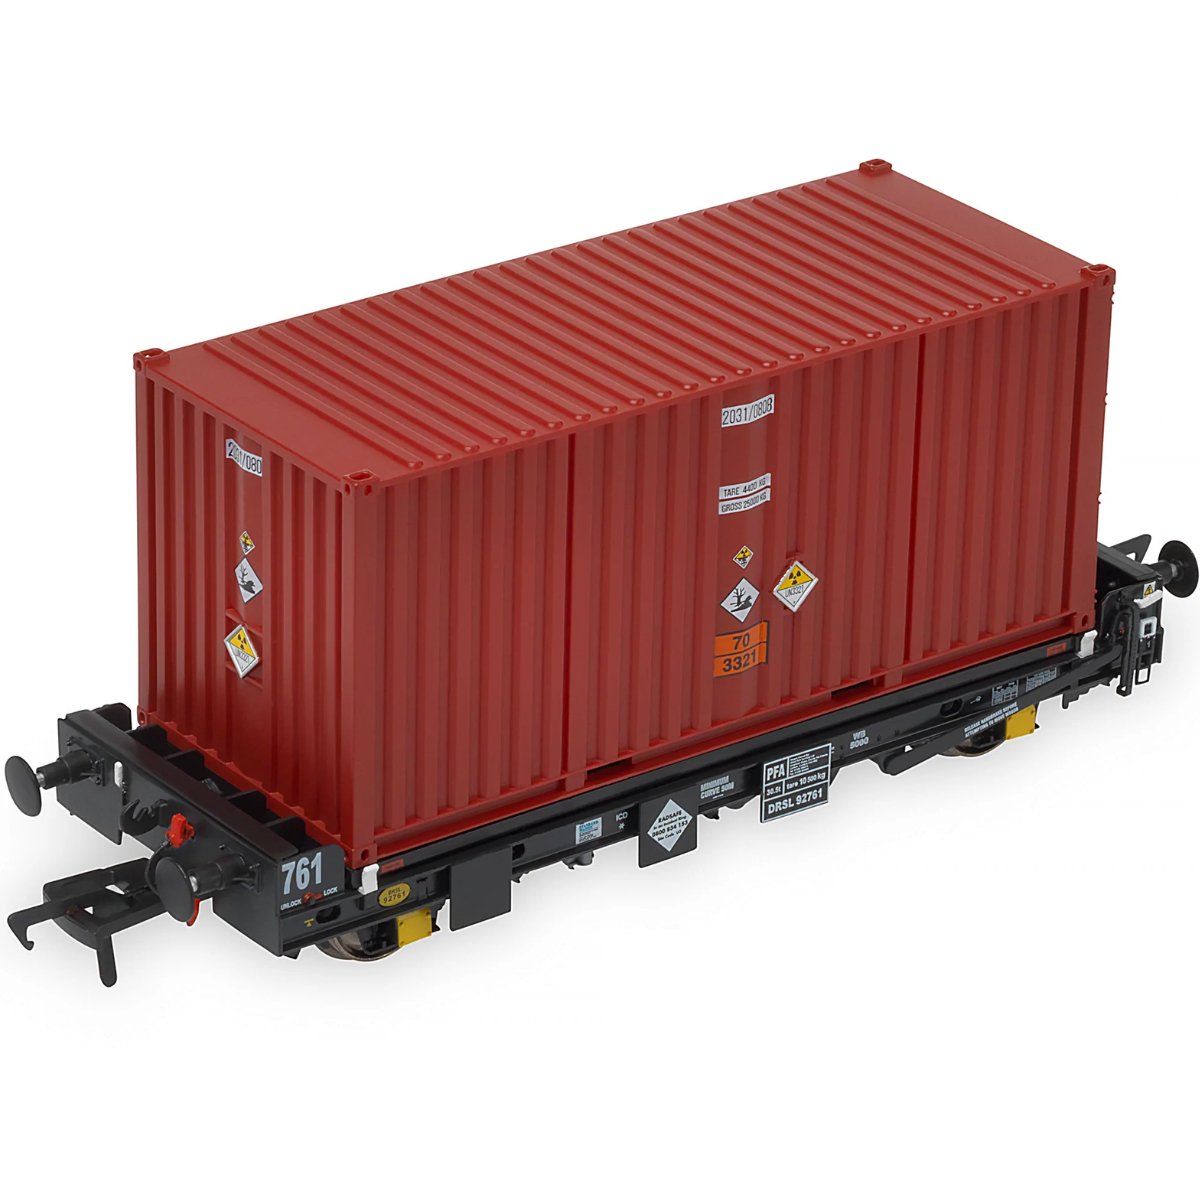 Accurascale PFA - DRS LLNW - 2031 Container Pack 6 - Phillips Hobbies